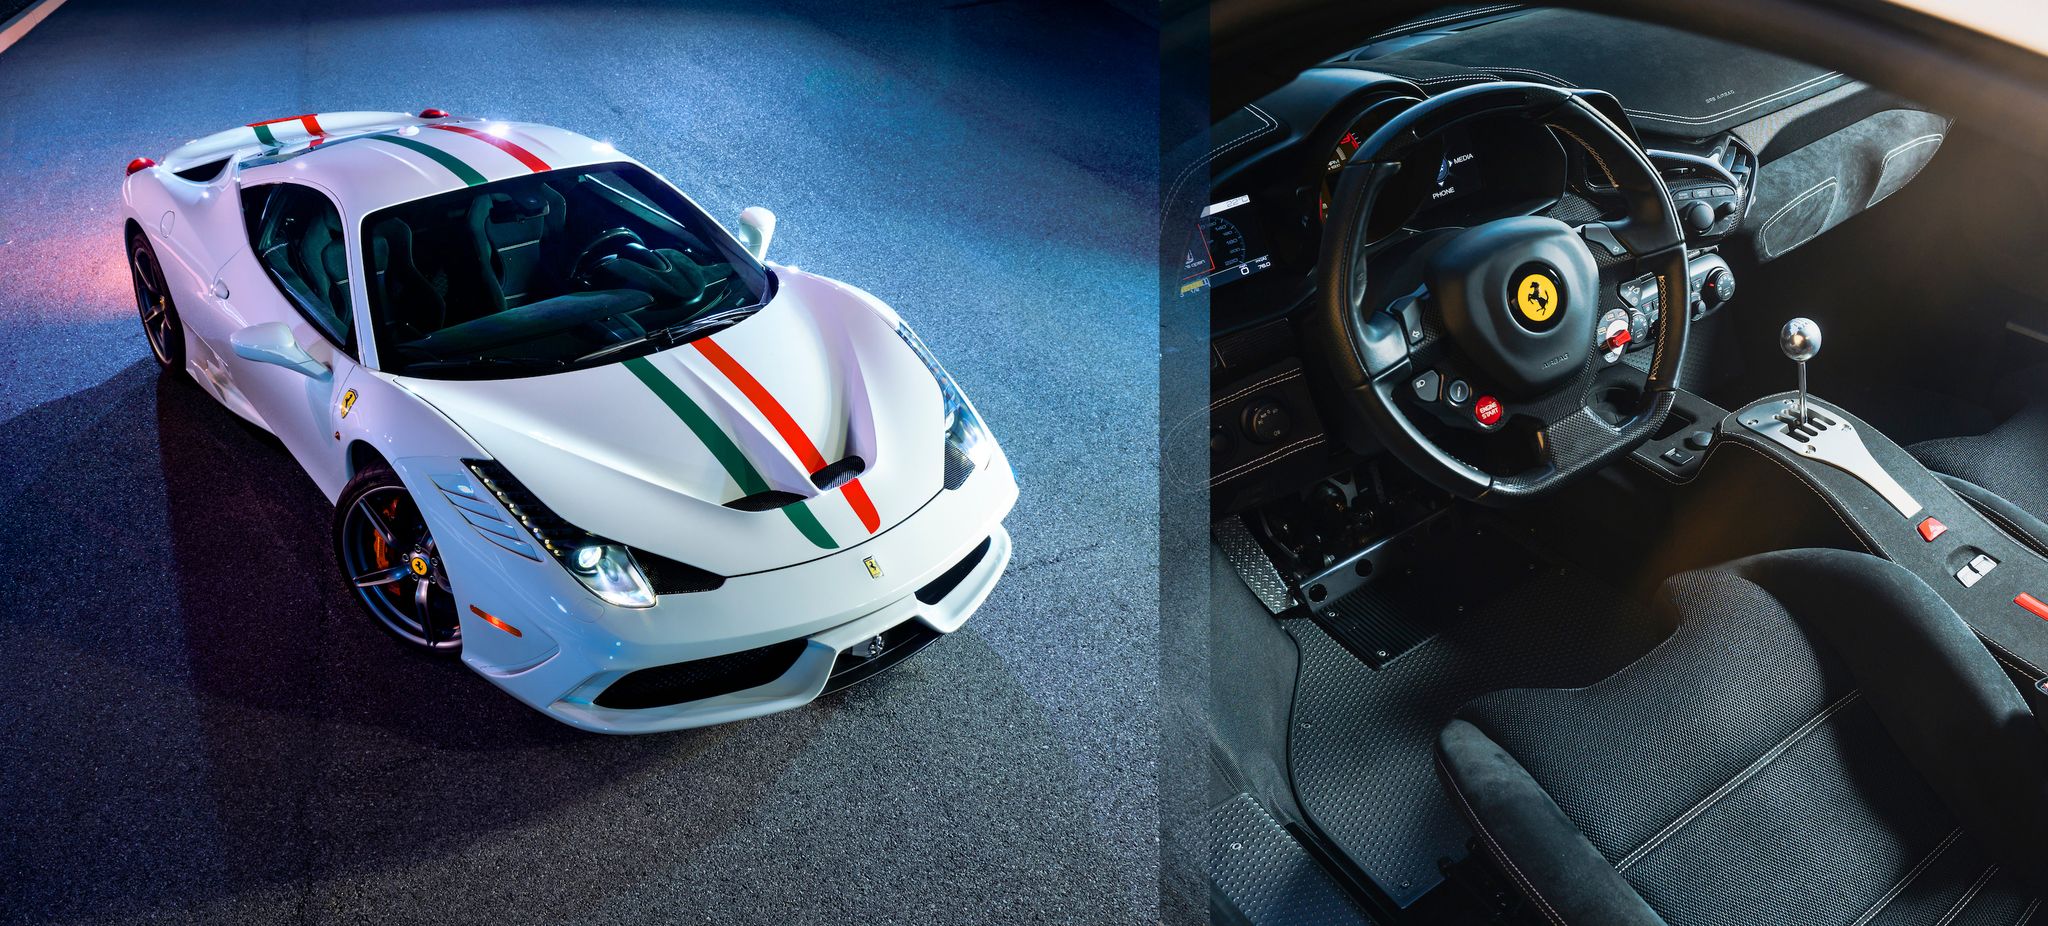 Manual-Swapped Ferrari 458 Speciale Rethinks the Modern Supercar